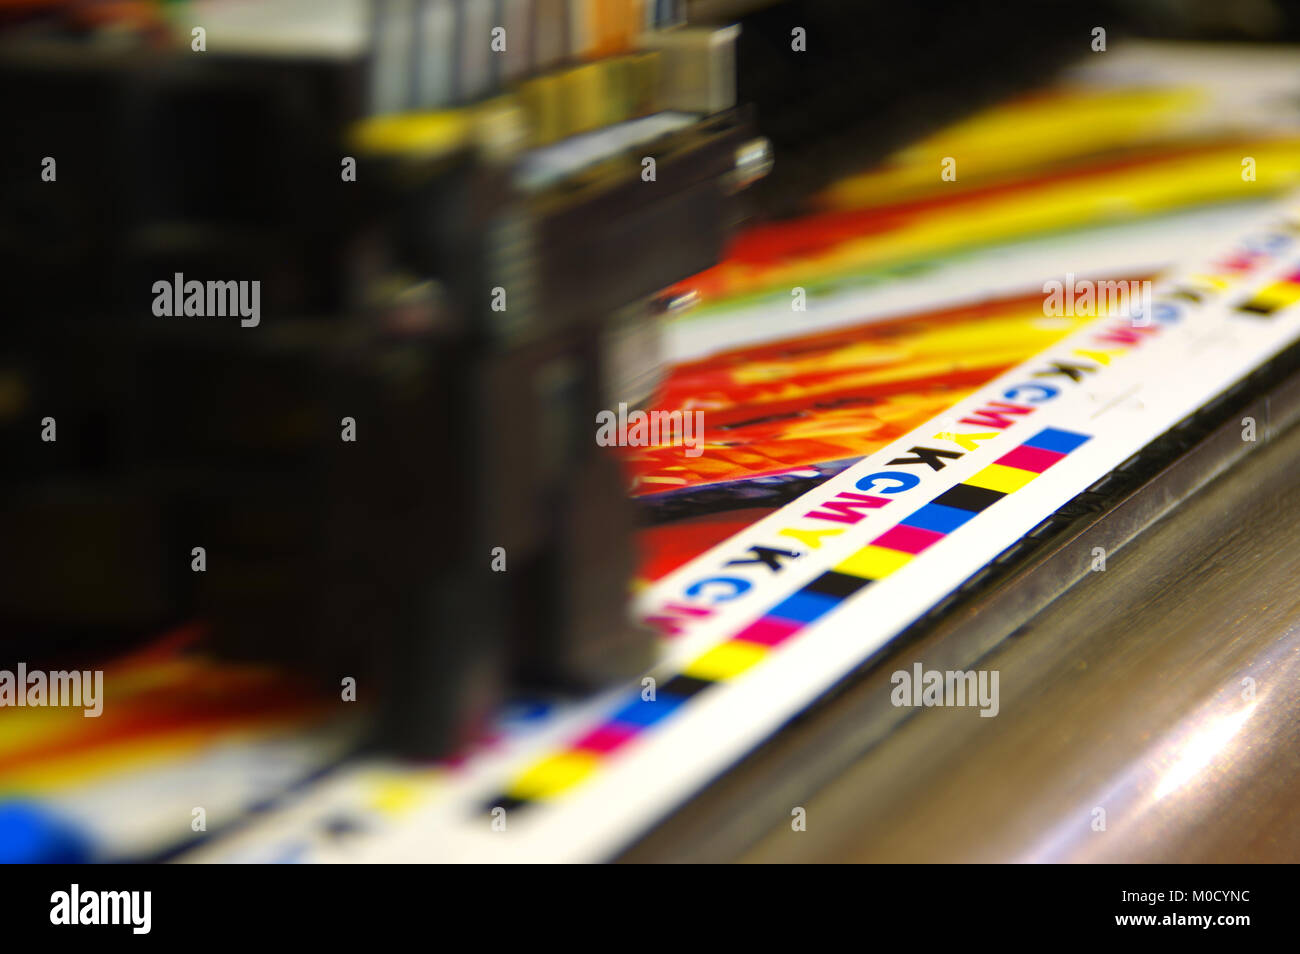 Printing head creates CMYK test and image on paper. Colorful large plotter printer machine. Stock Photo